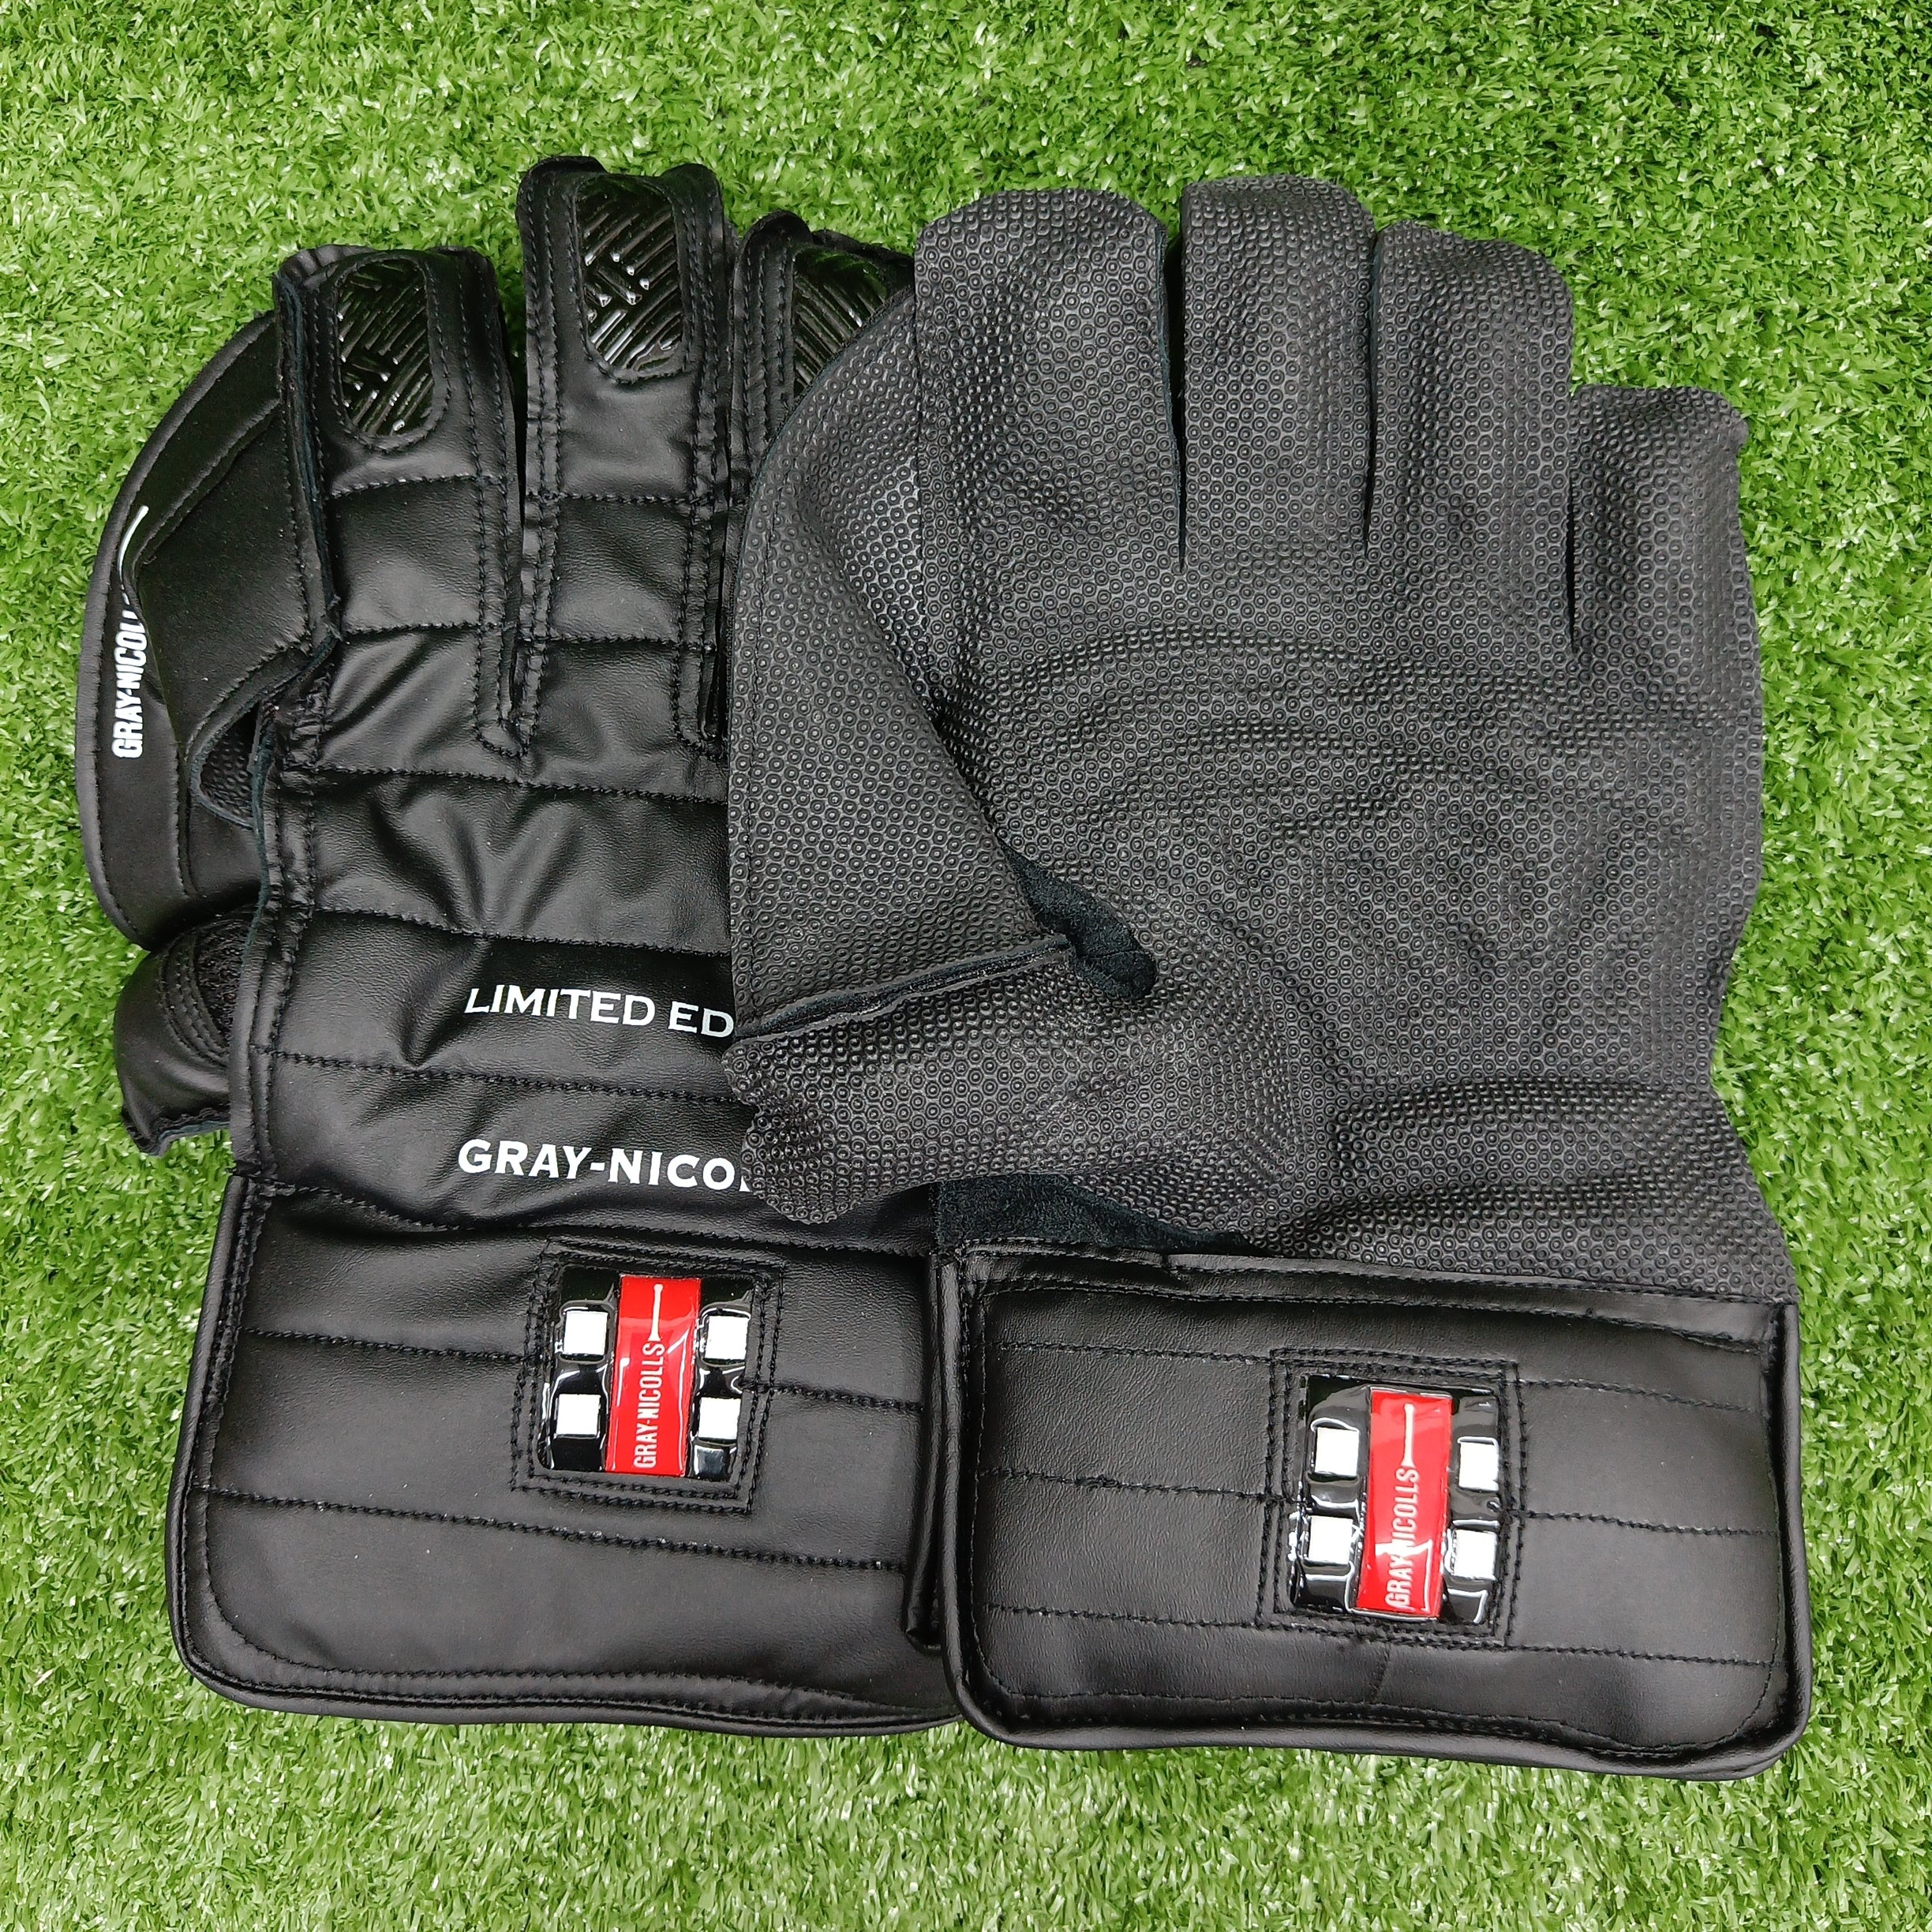 Gray-Nicolls Black Limited Edition Adult Cricket Wicket Keeping Gloves